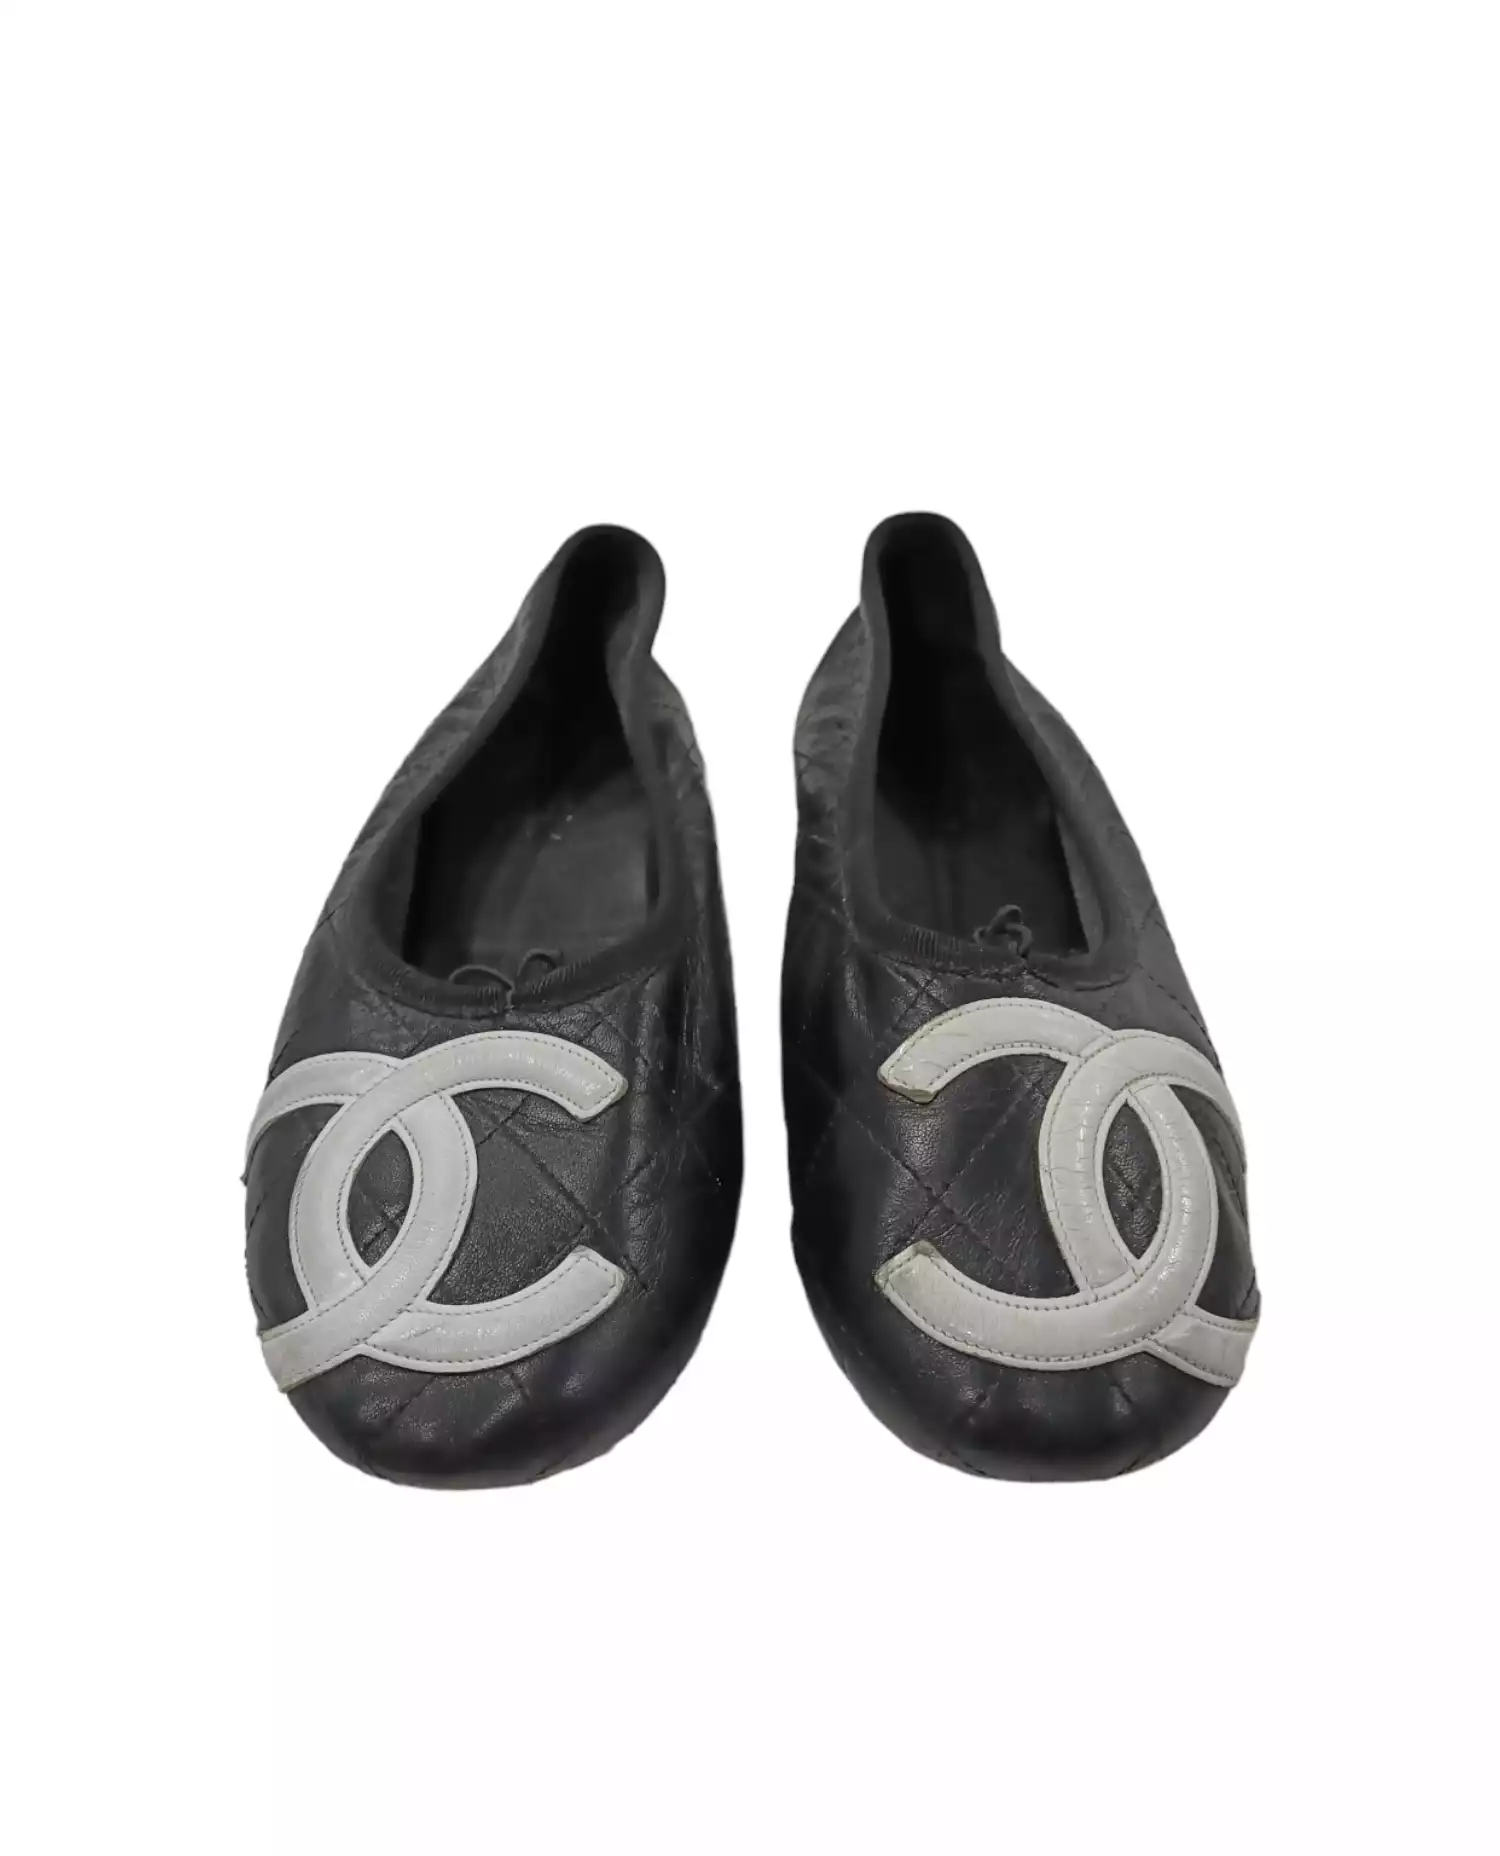 Shoes by Chanel